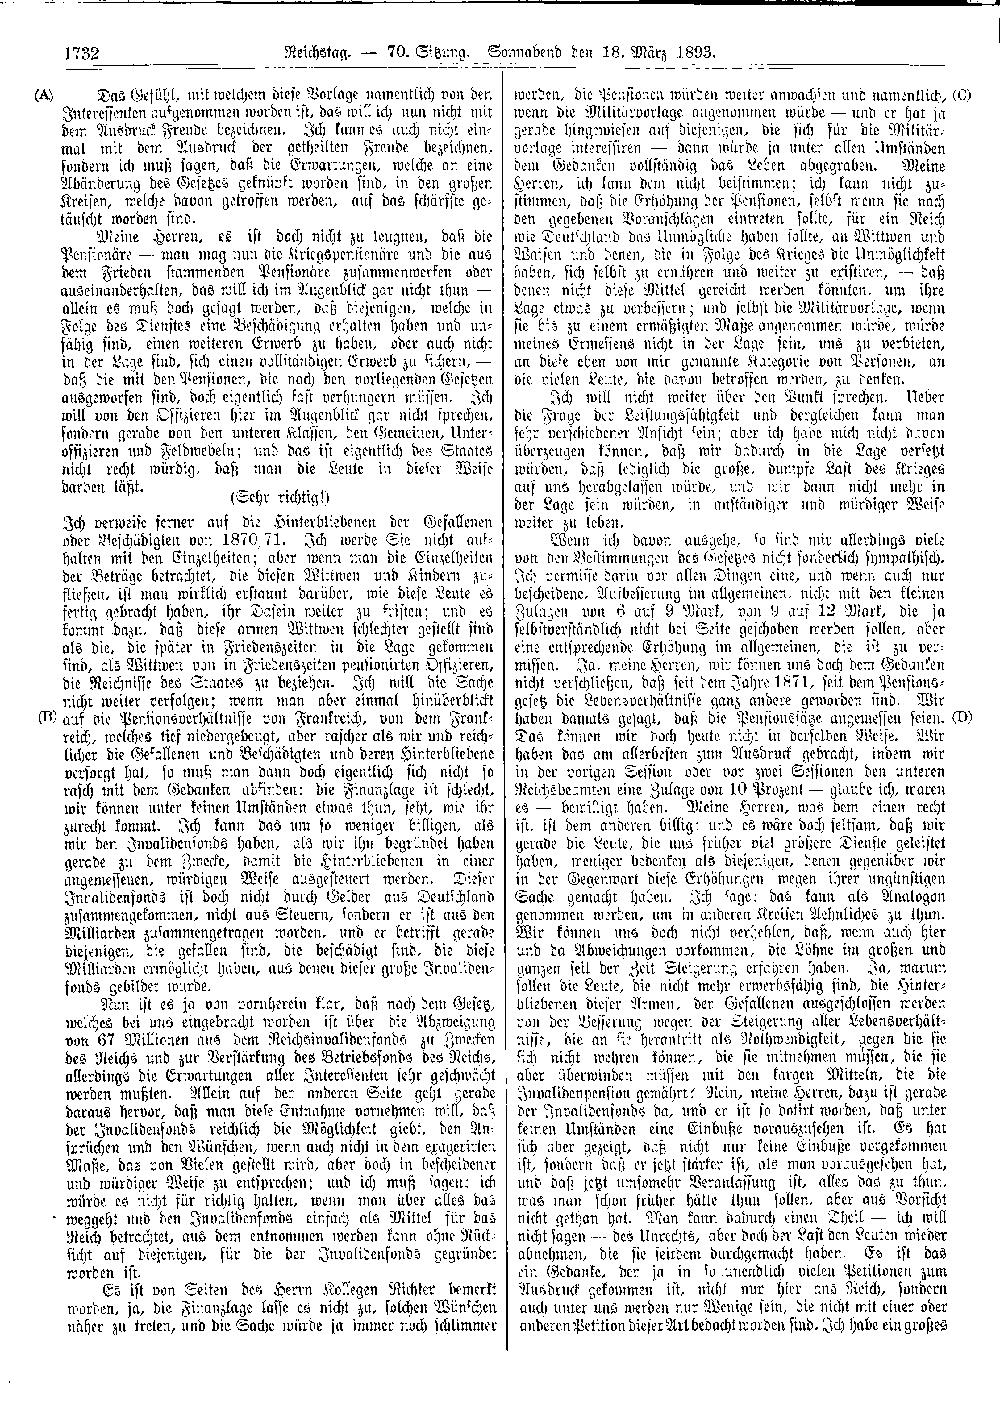 Scan of page 1732